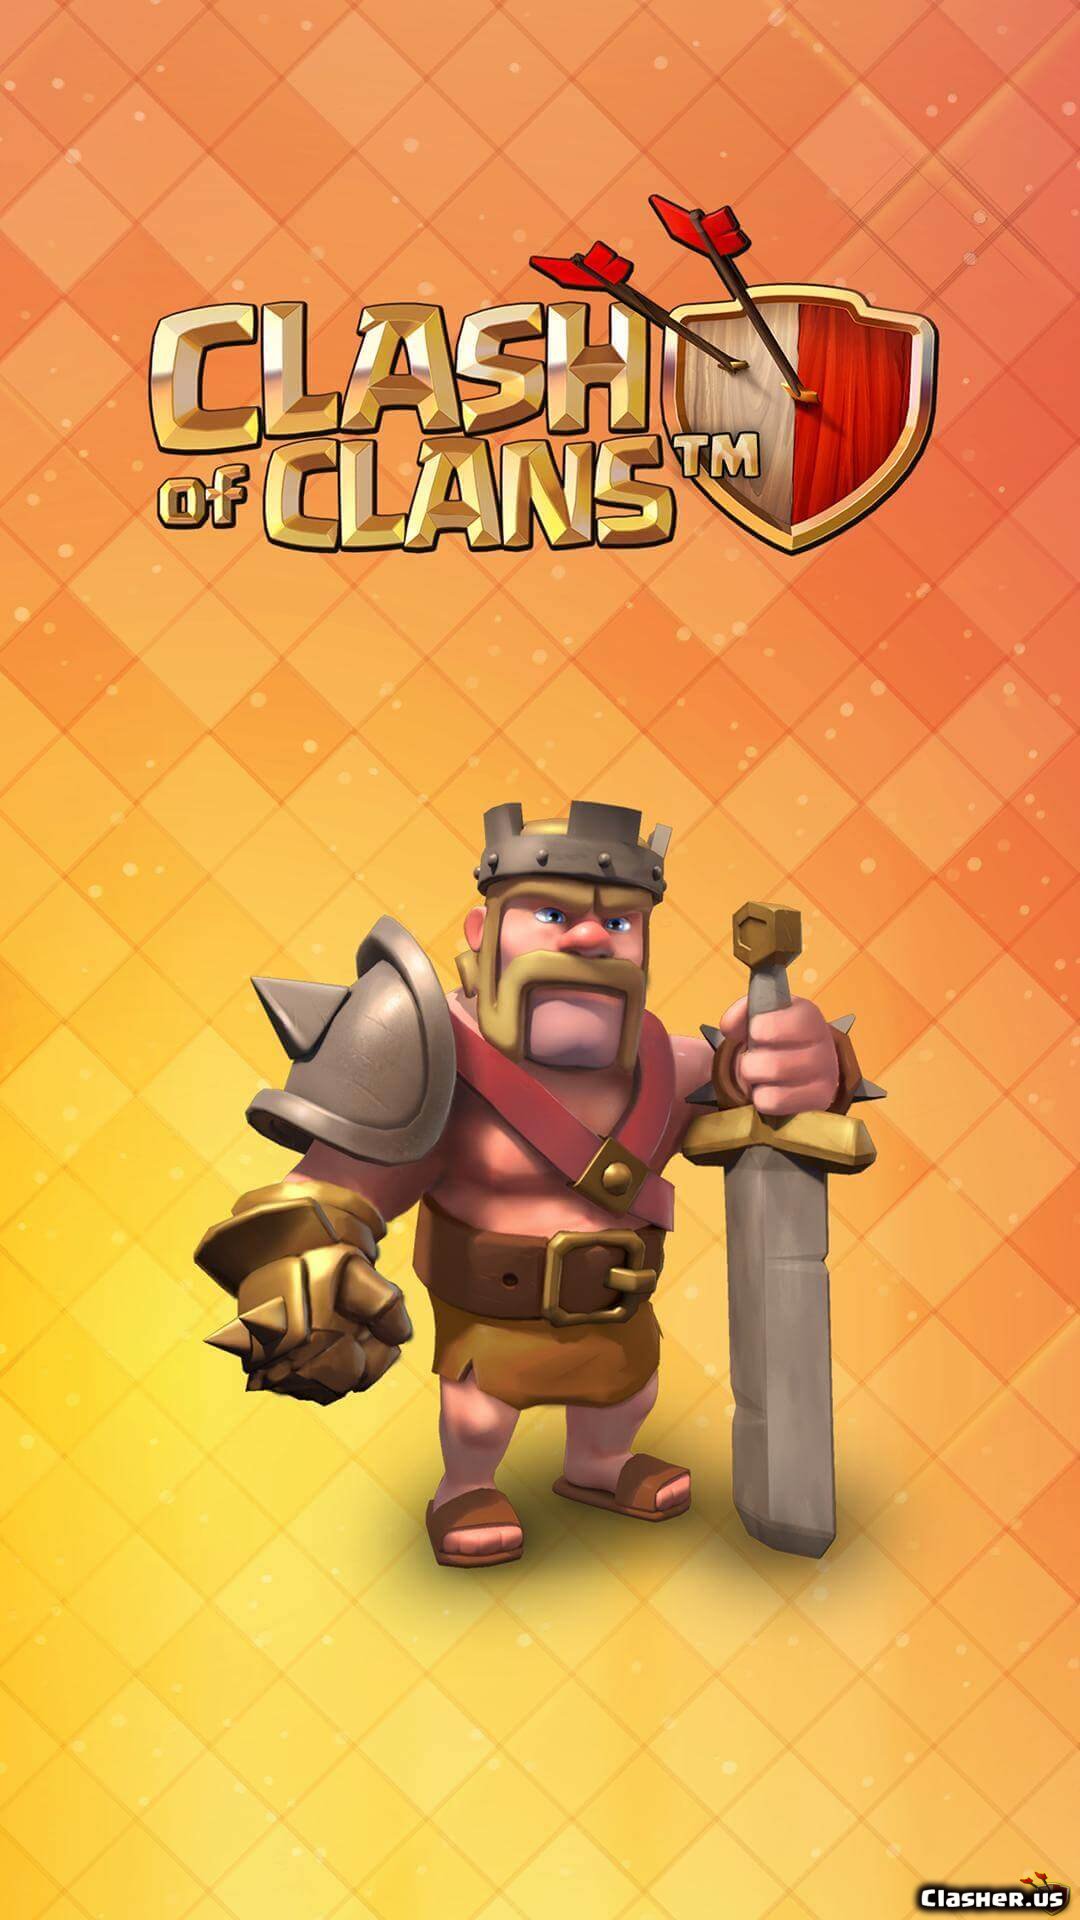 Clash of Clans - Barbarian King